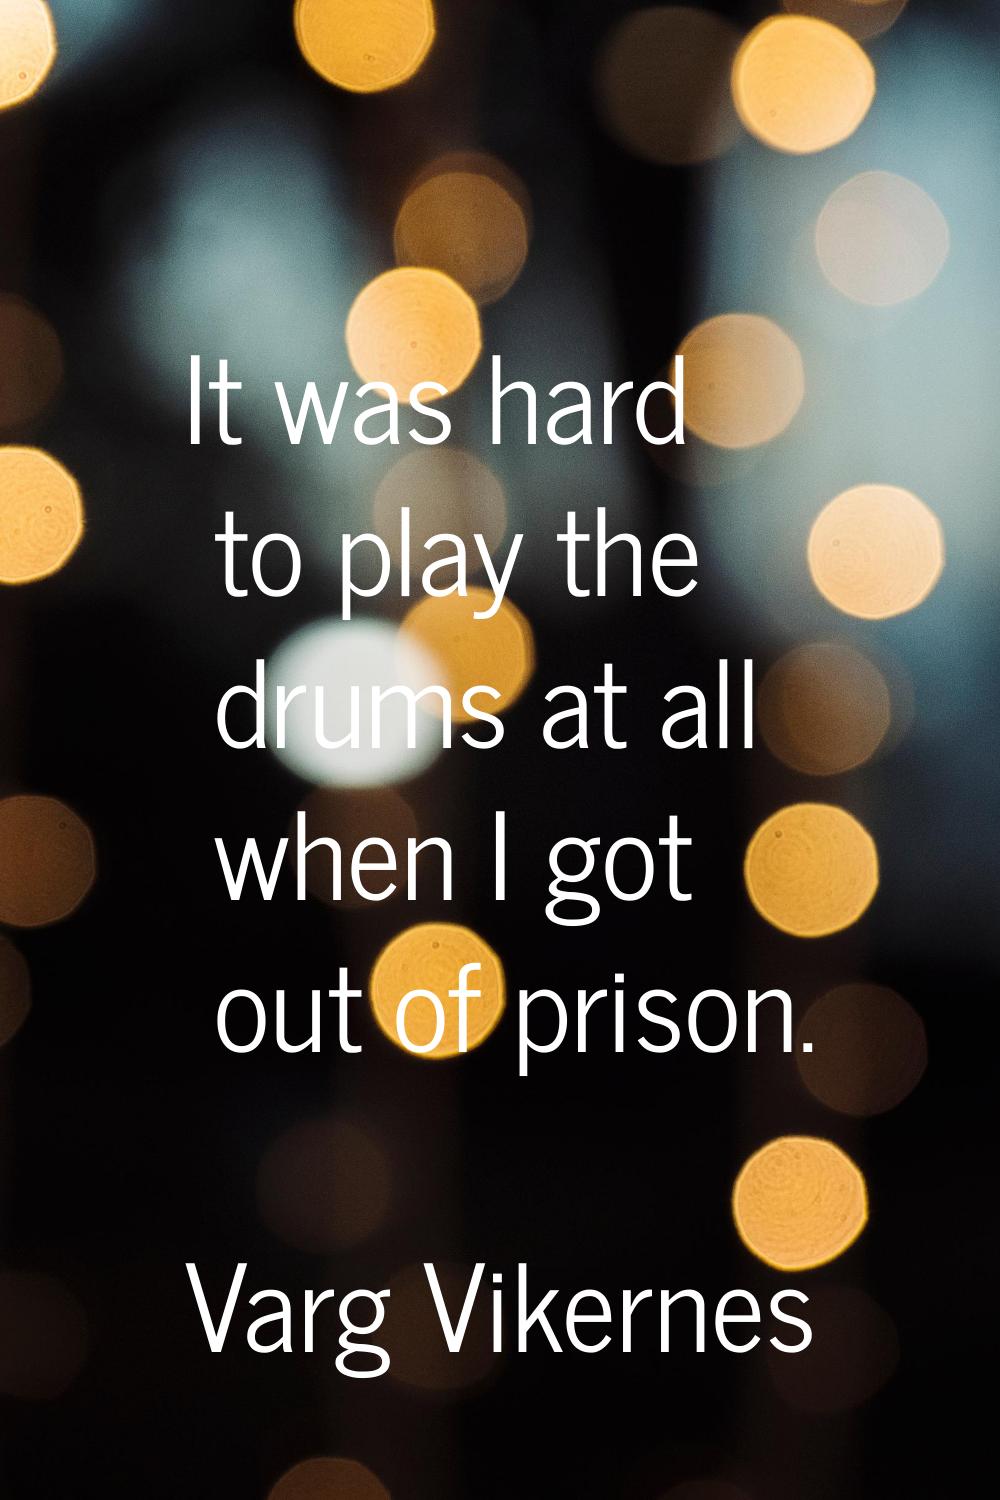 It was hard to play the drums at all when I got out of prison.